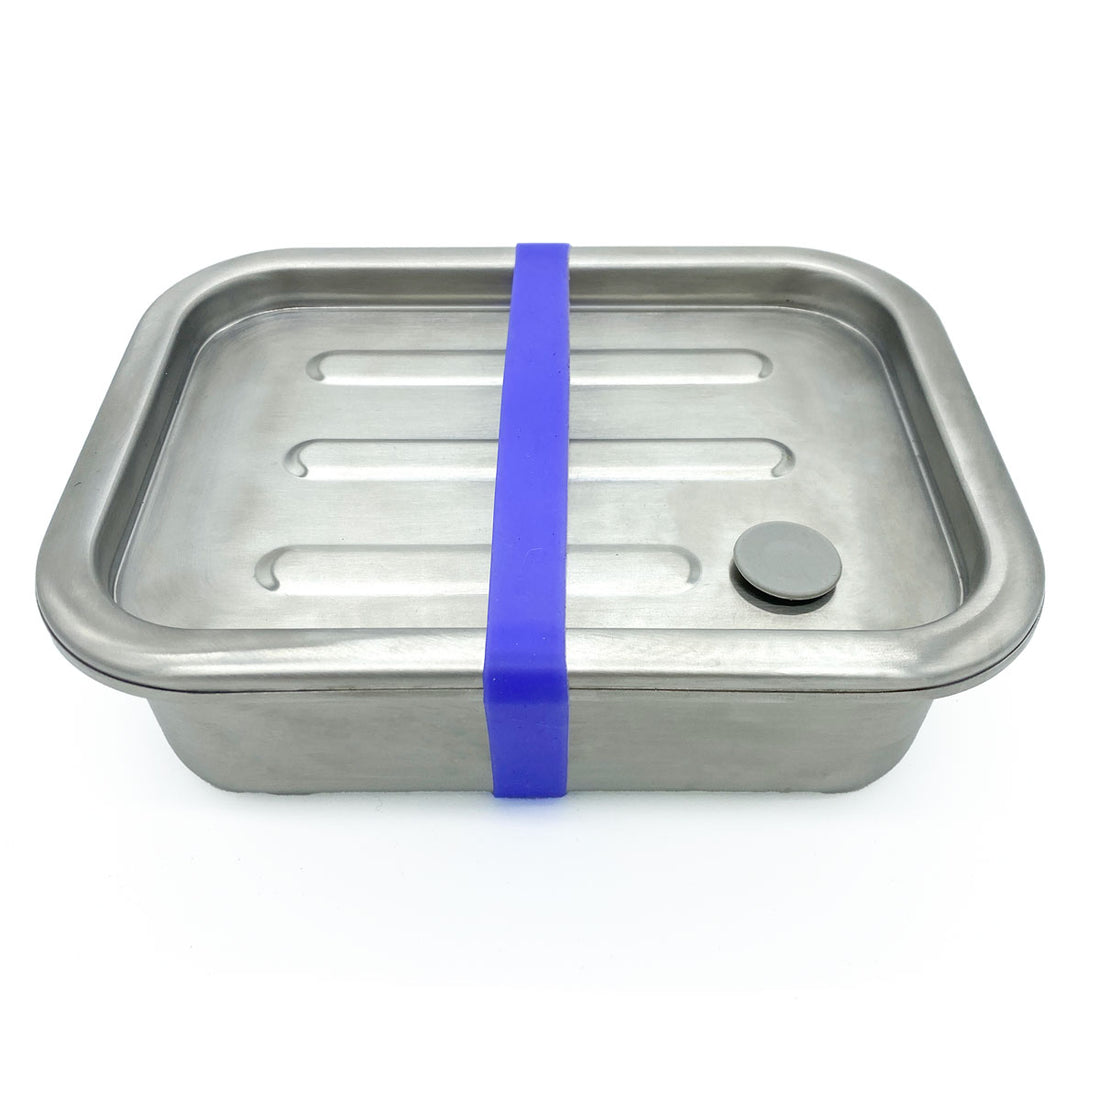 stainless steel snack box closed with purple rubber band